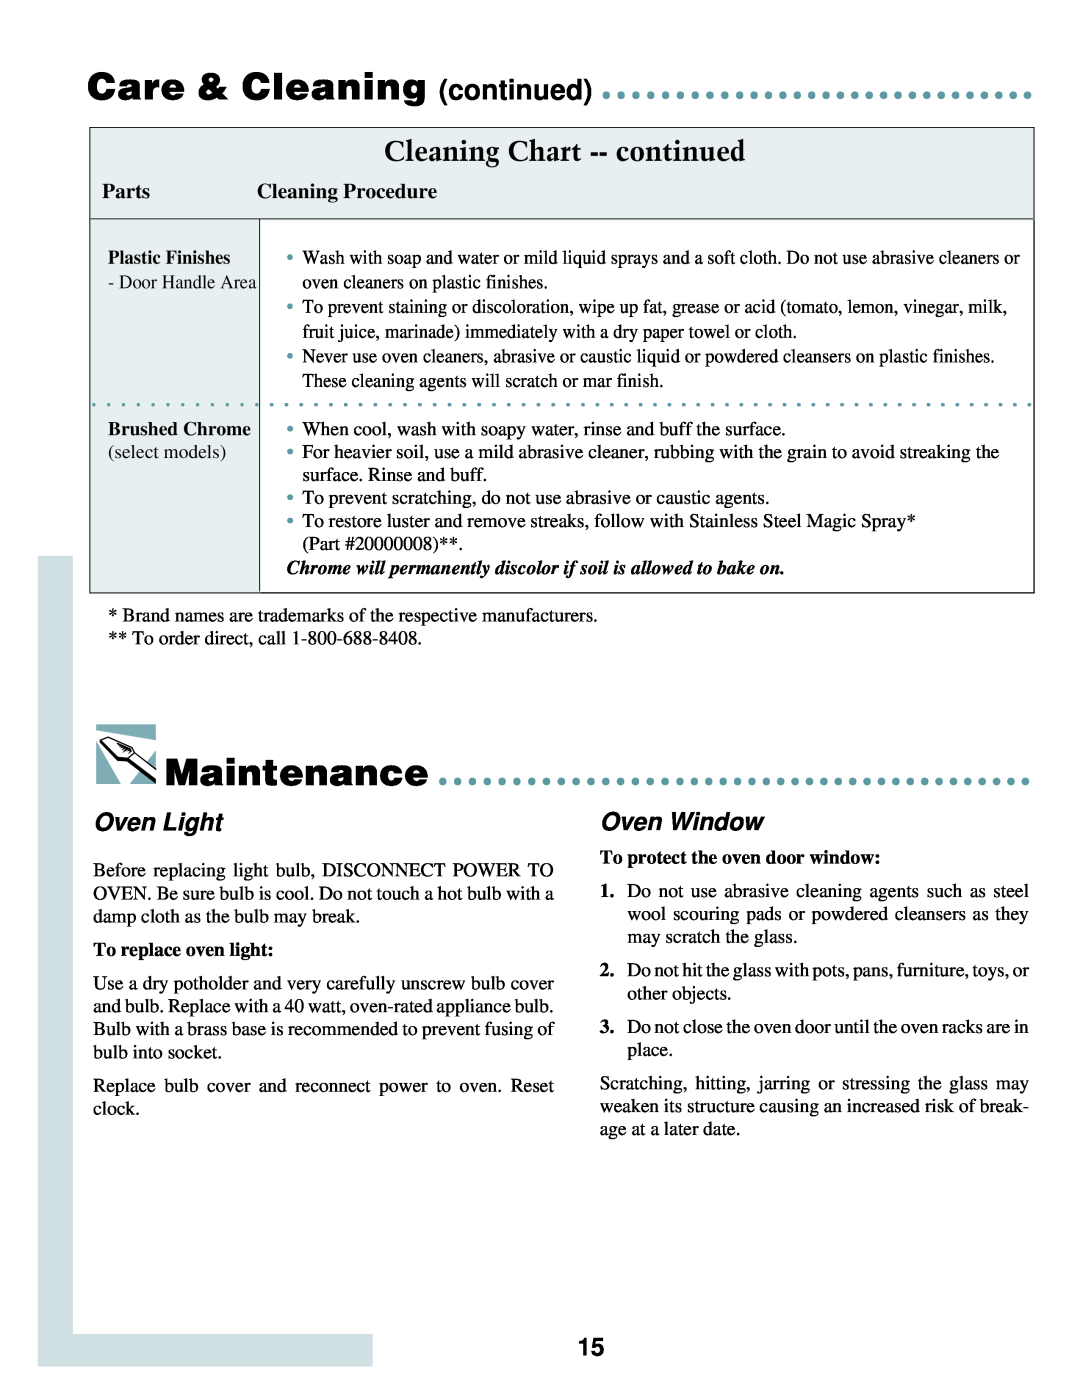 Maytag MMW5527 Maintenance, Cleaning Chart --continued, Oven Light, Oven Window, Plastic Finishes, Brushed Chrome, Parts 